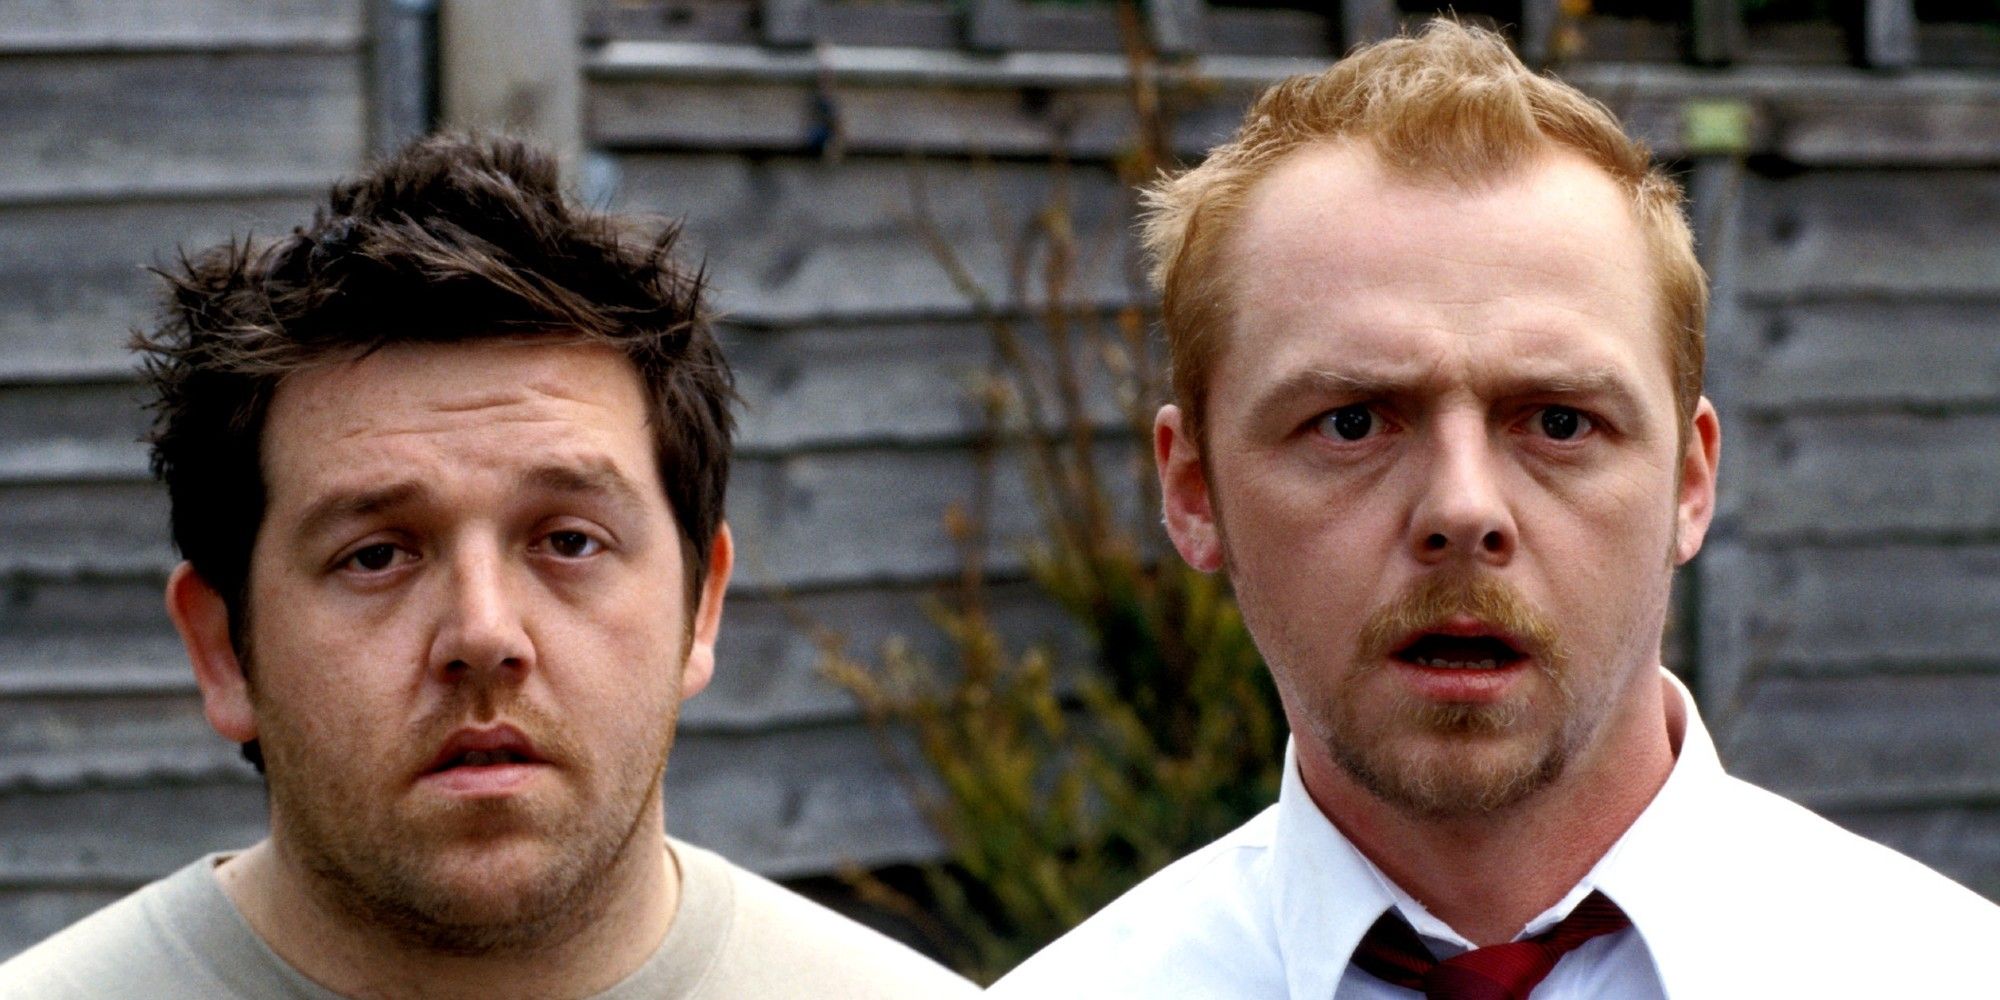 Shaun and Ed looking surprised in Shaun Of The Dead